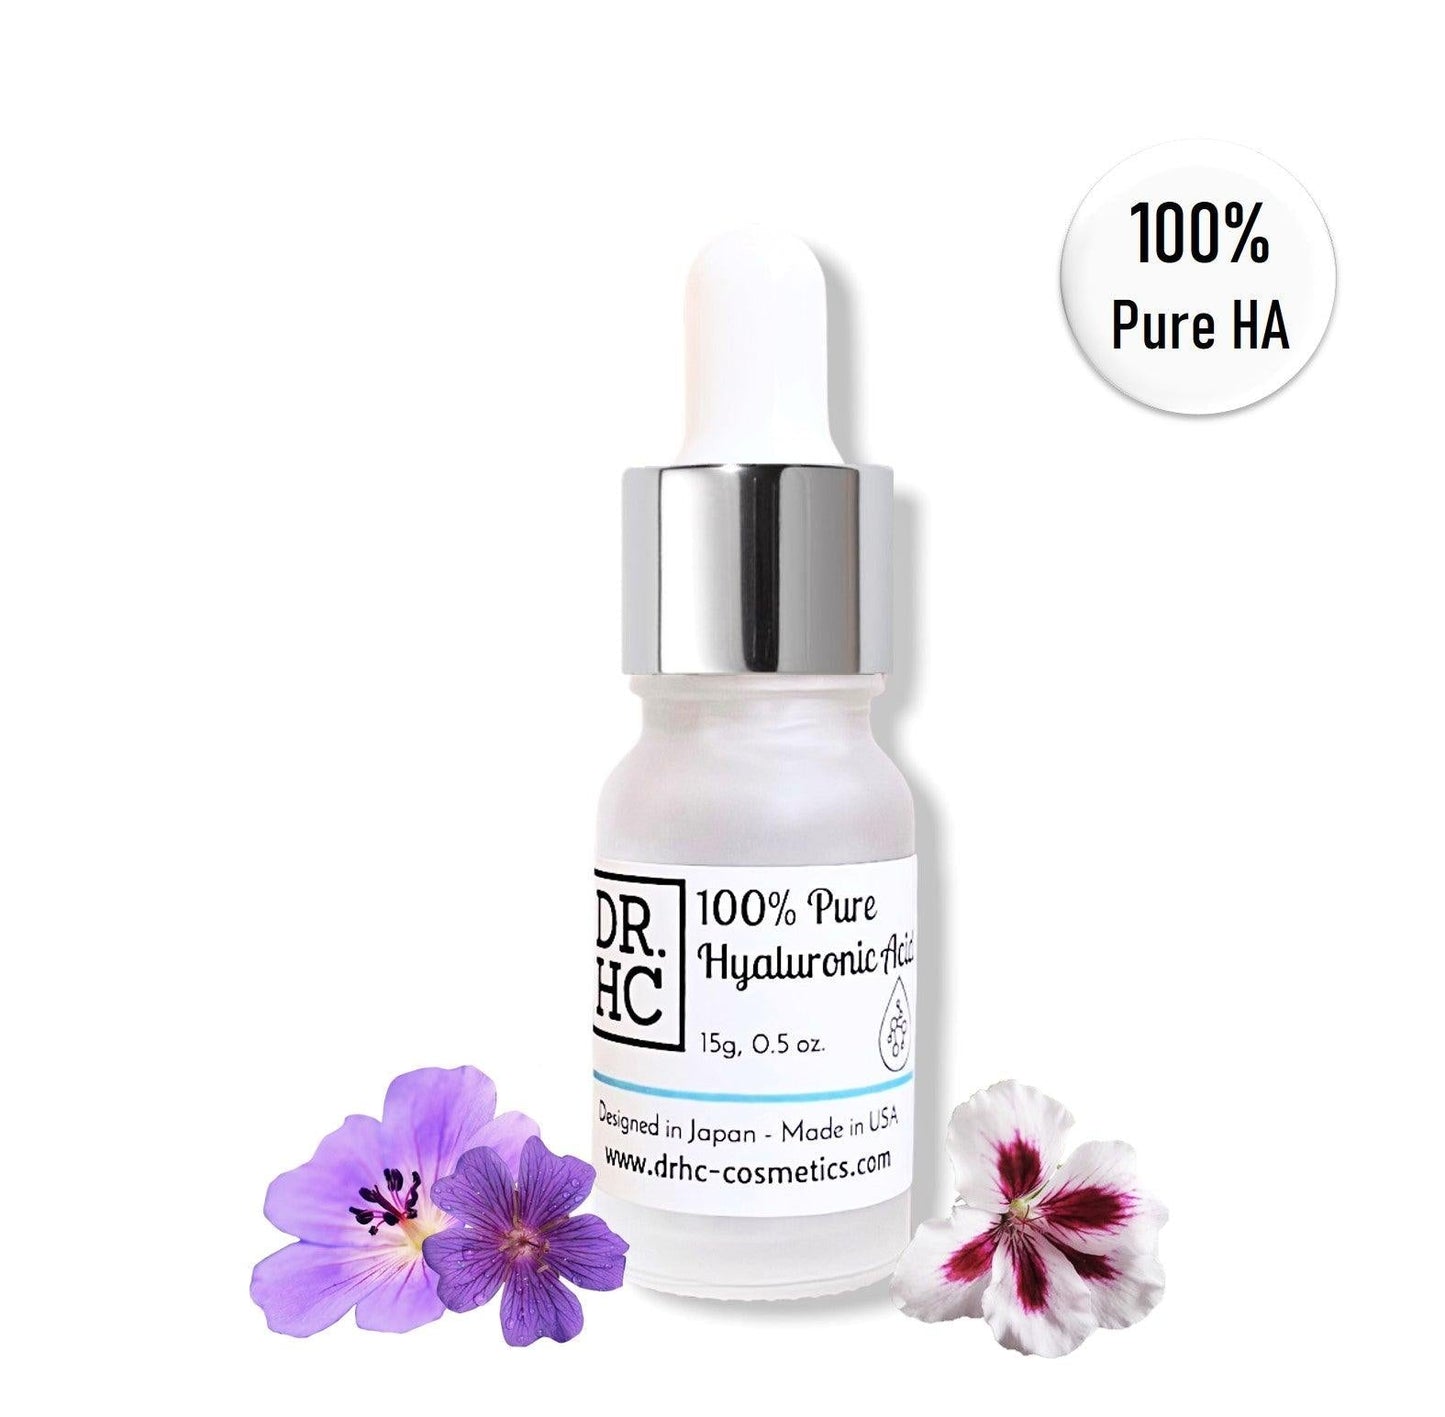 DR.HC 100% Pure Hyaluronic Acid (with 10% Hyaluronic Acid content) (15g, 0.5oz.) (Hydrating, Skin firming, Skin toning, Anti-acne...)-2